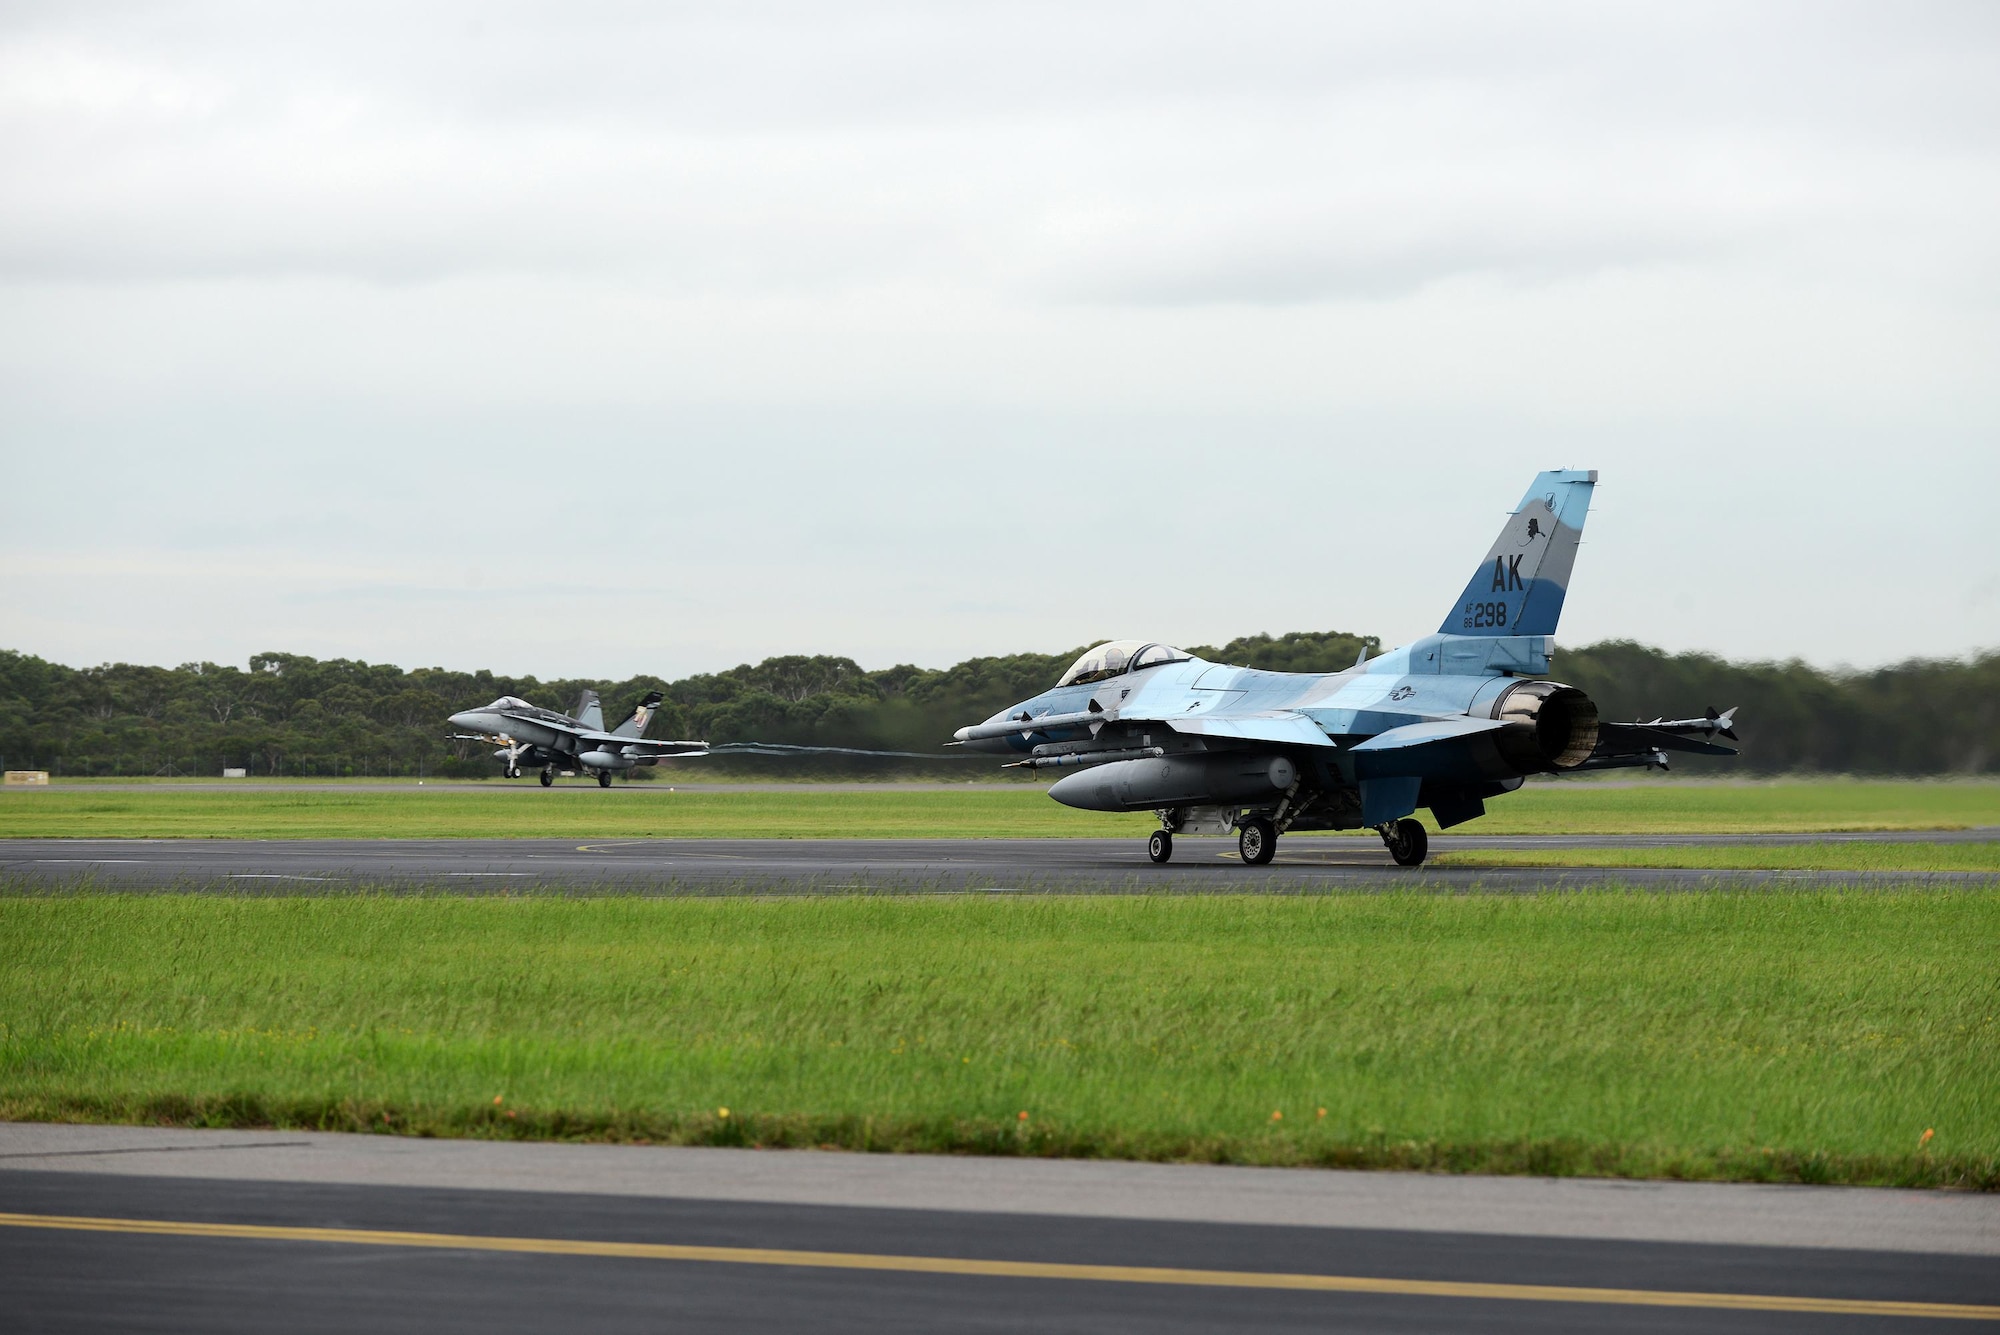 A U.S. Air Force F-16 Fighting Falcon taxis as a Royal Australian Air Force F-18A Hornet takes off at RAAF Williamtown, during Exercise Diamond Shield 2017 in New South Wales, Australia, March 23, 2017. The F-16 and the F-18 served as the primary platforms for providing ‘Red Air’ and ‘Blue Air’ forces, respectively. (U.S. Air Force photo by Tech. Sgt. Steven R. Doty)